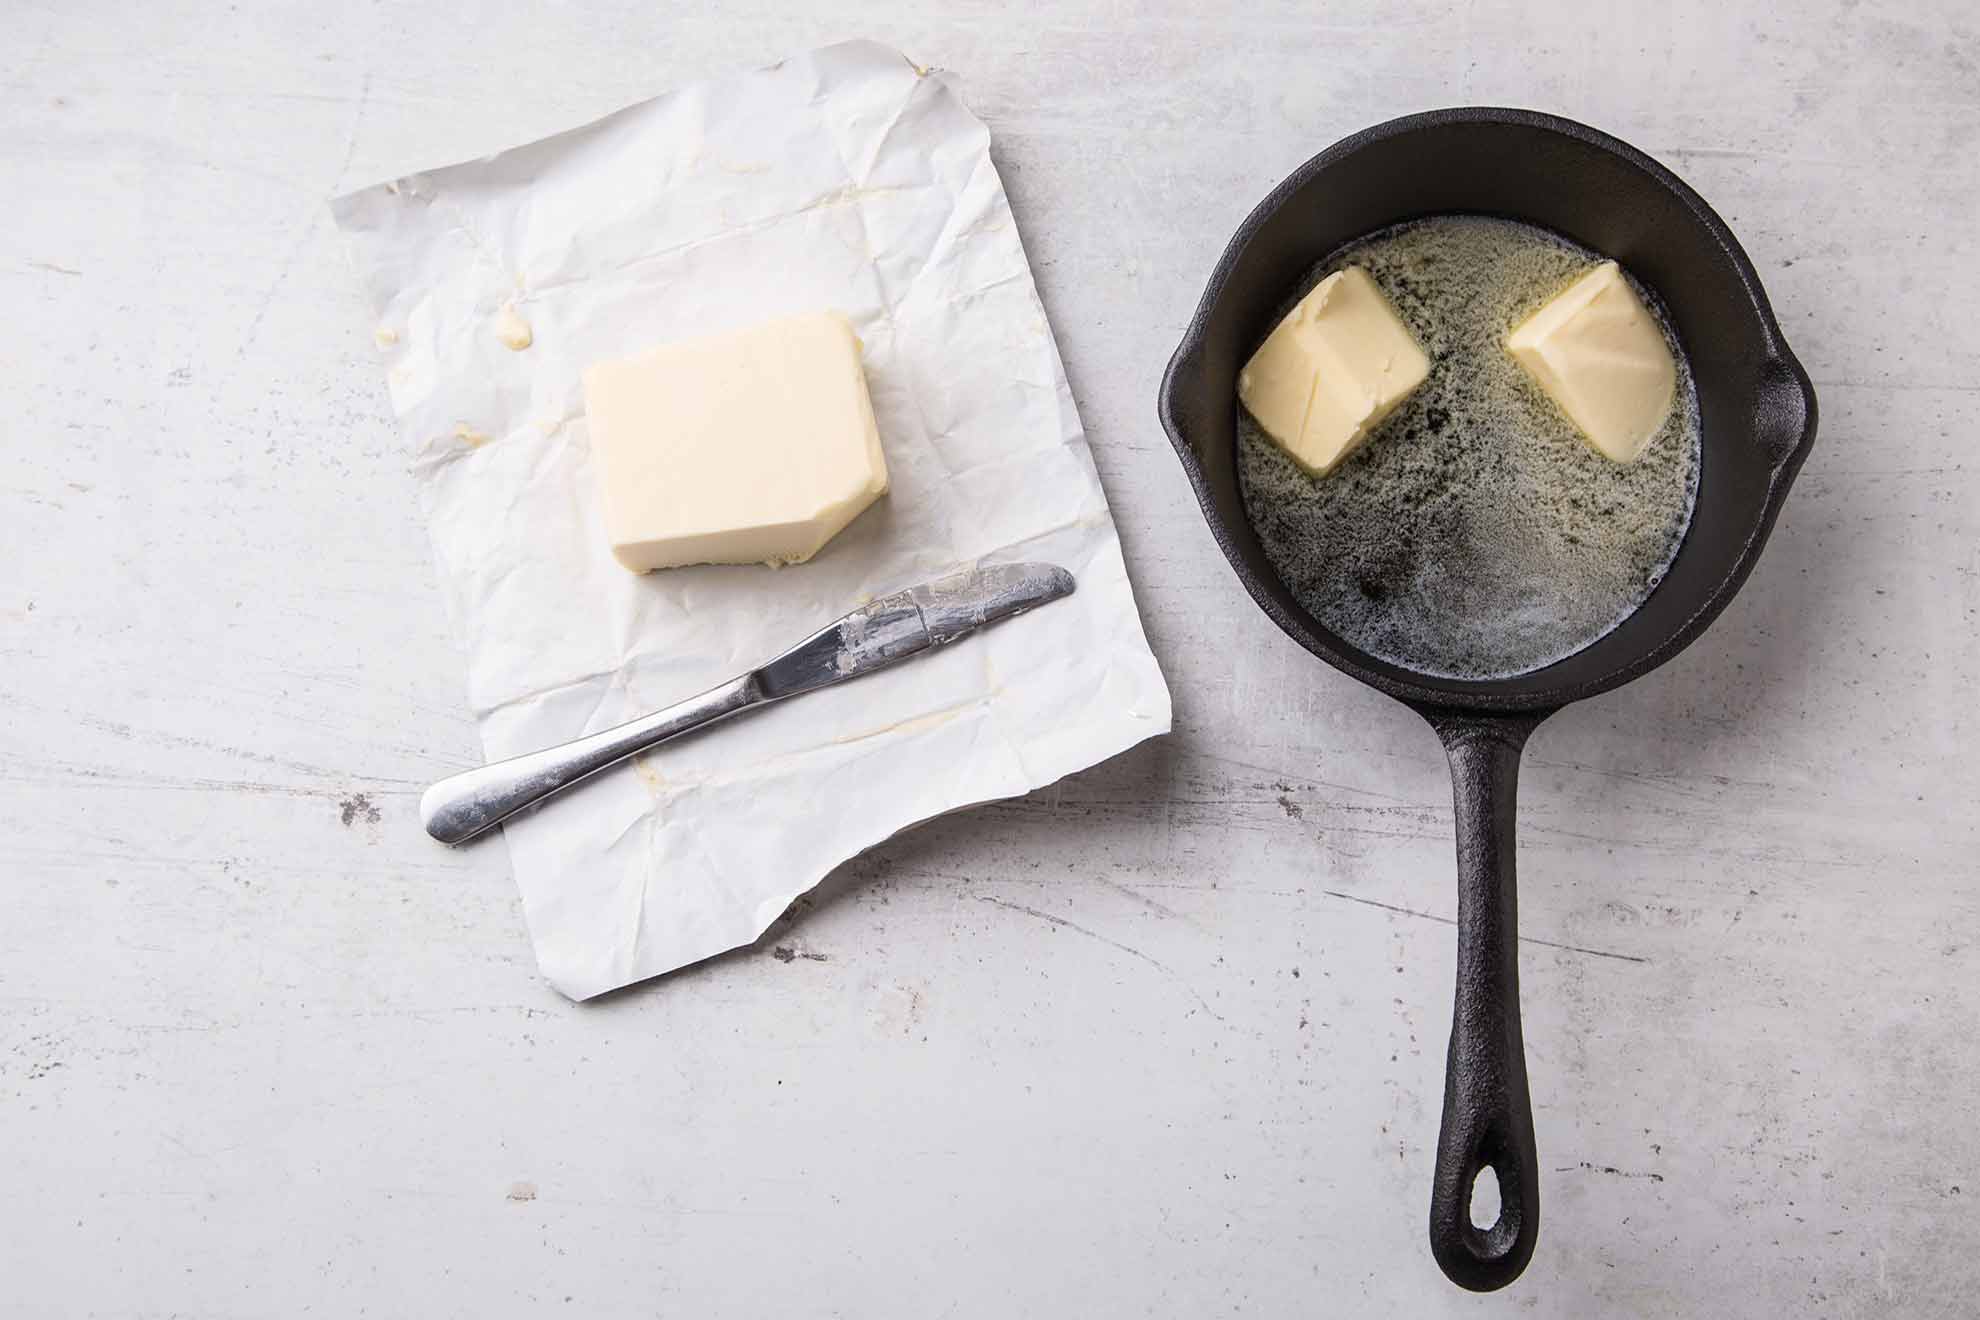 An iron skillet with melting butter sitting on a counter and next to an open package of margarine.